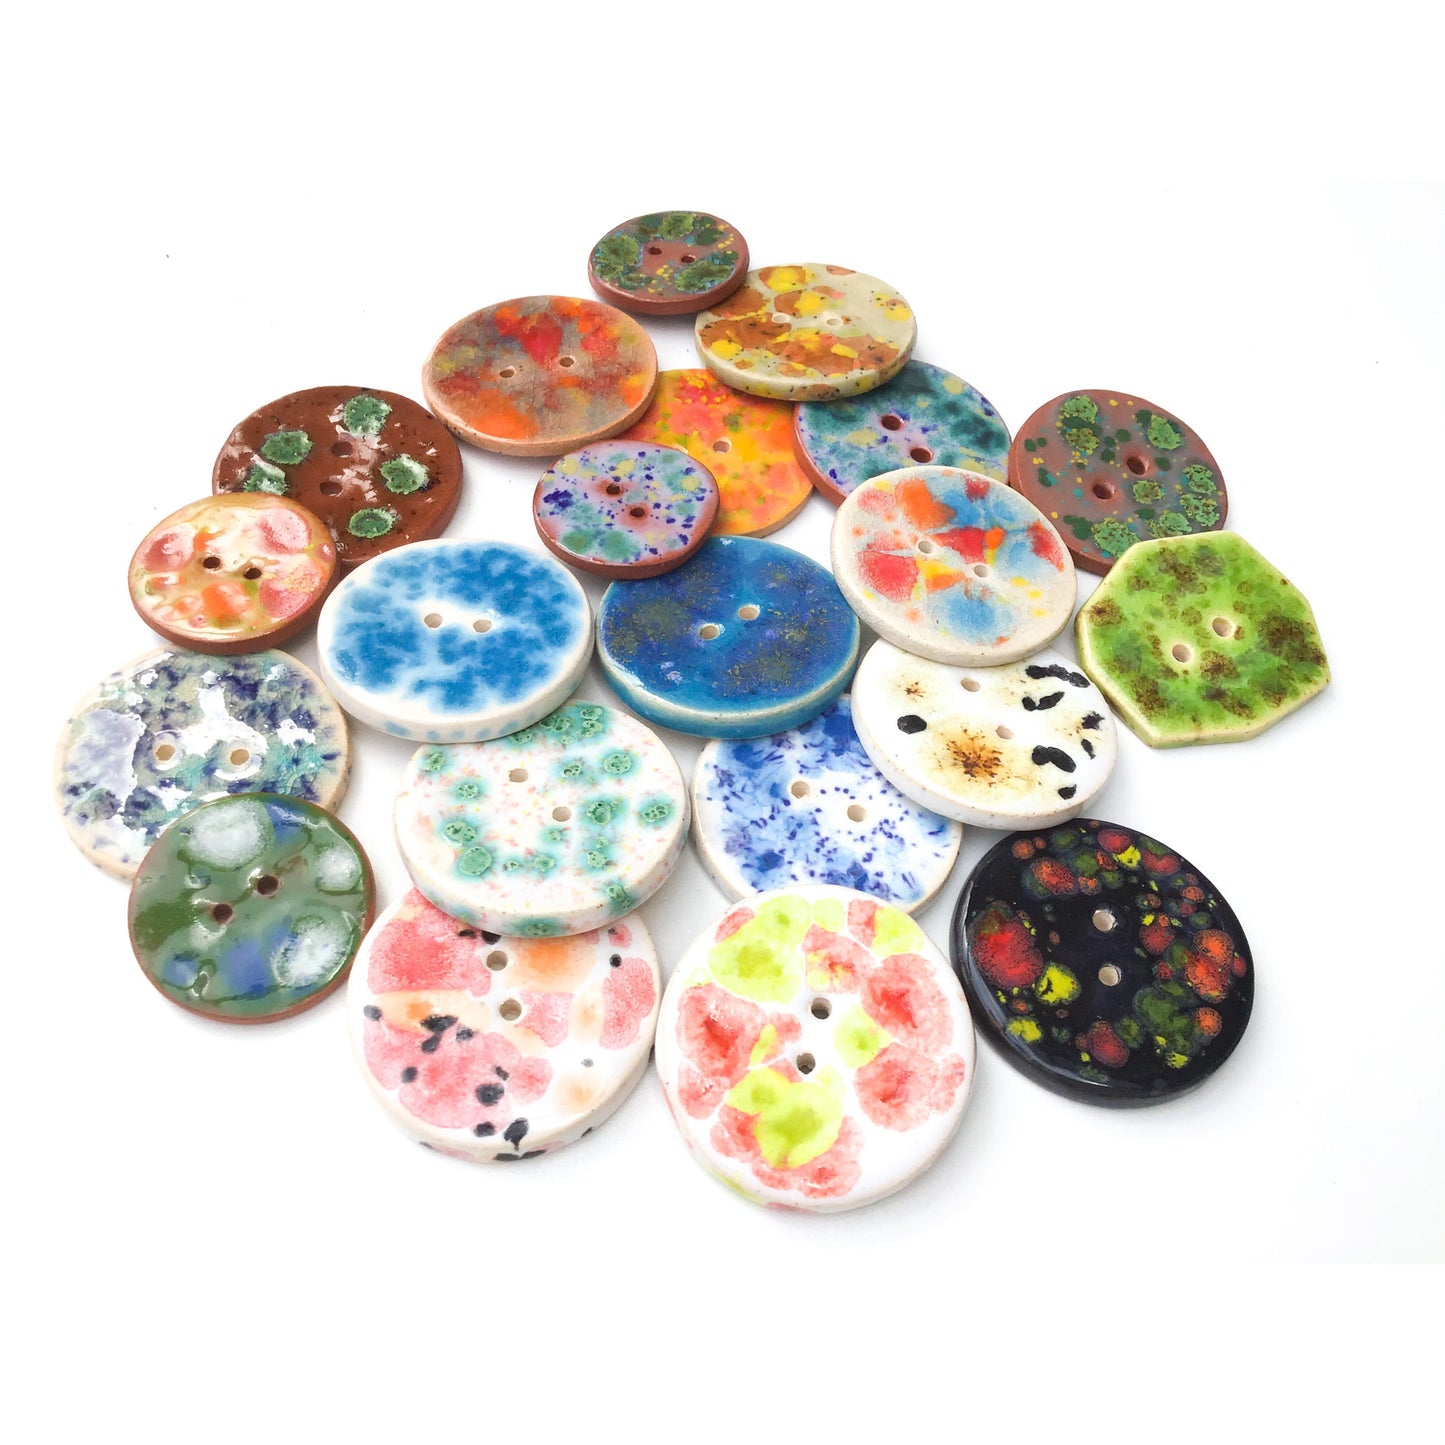 Color Burst Buttons : Colorful Ceramic Buttons with a Splash of Color